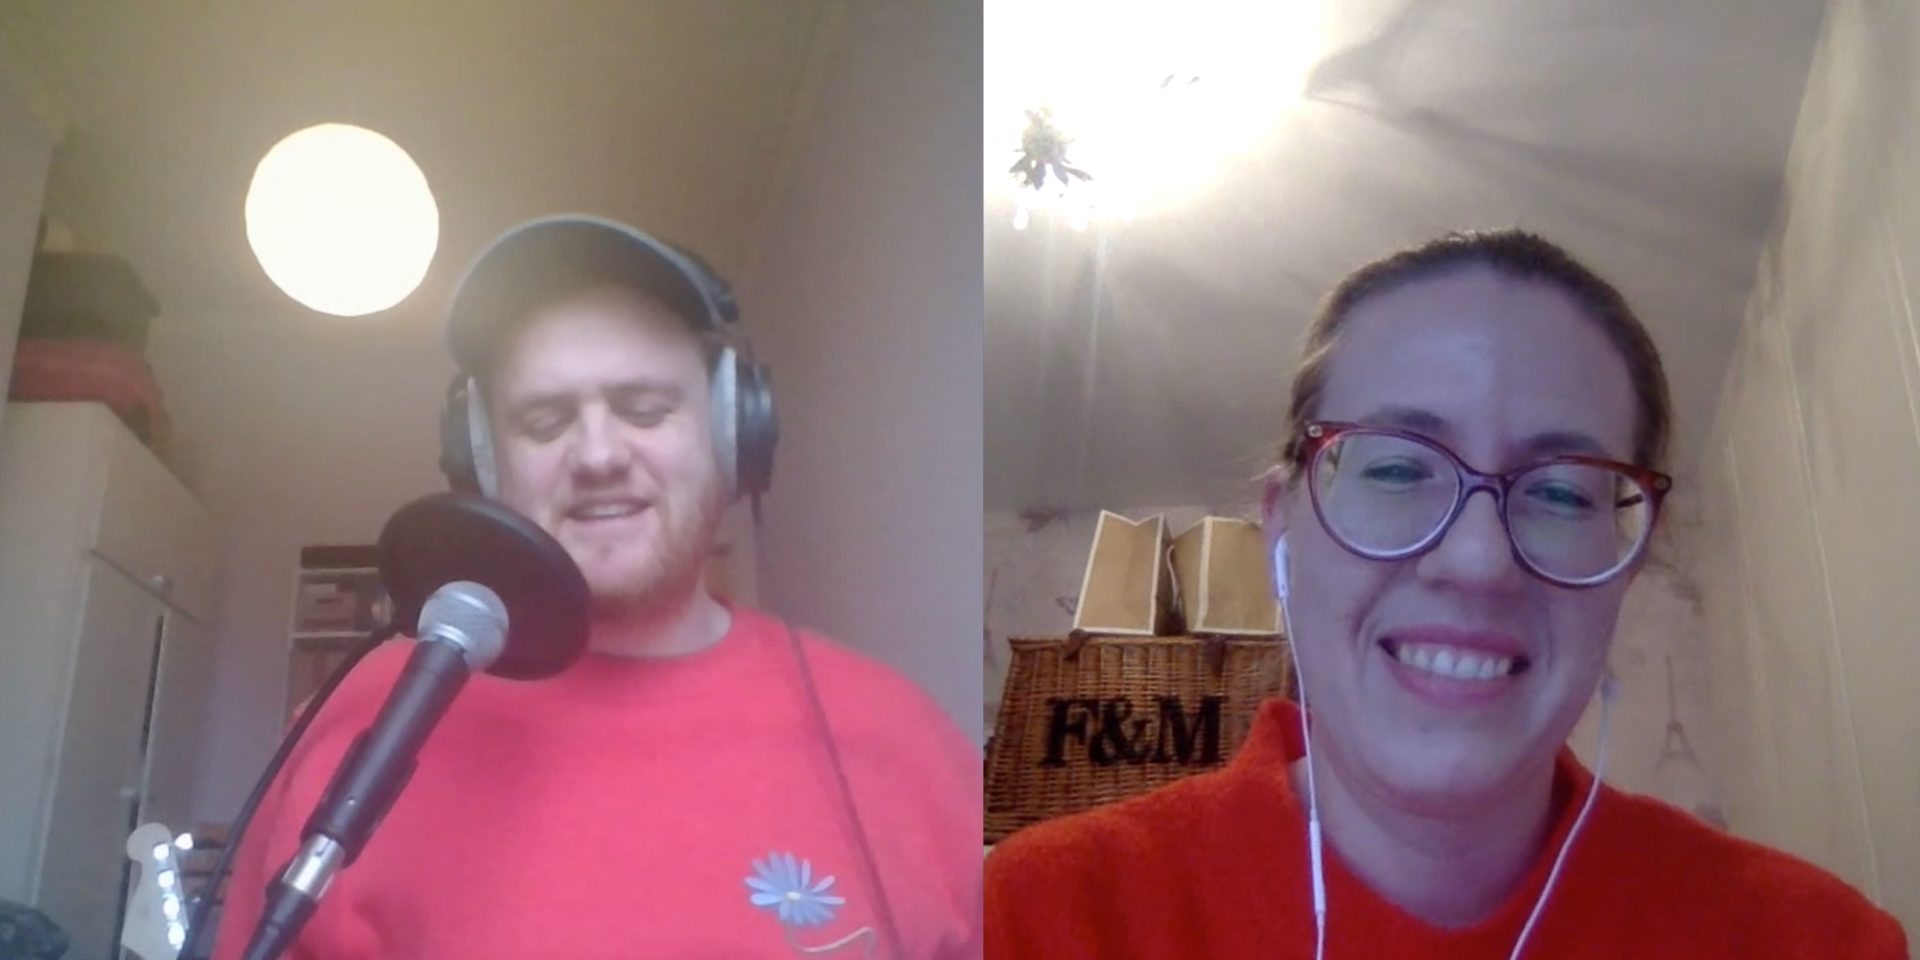 The FFS Show 23: PartyGate & Freedom of Information with Jenna Corderoy from openDemocracy 4